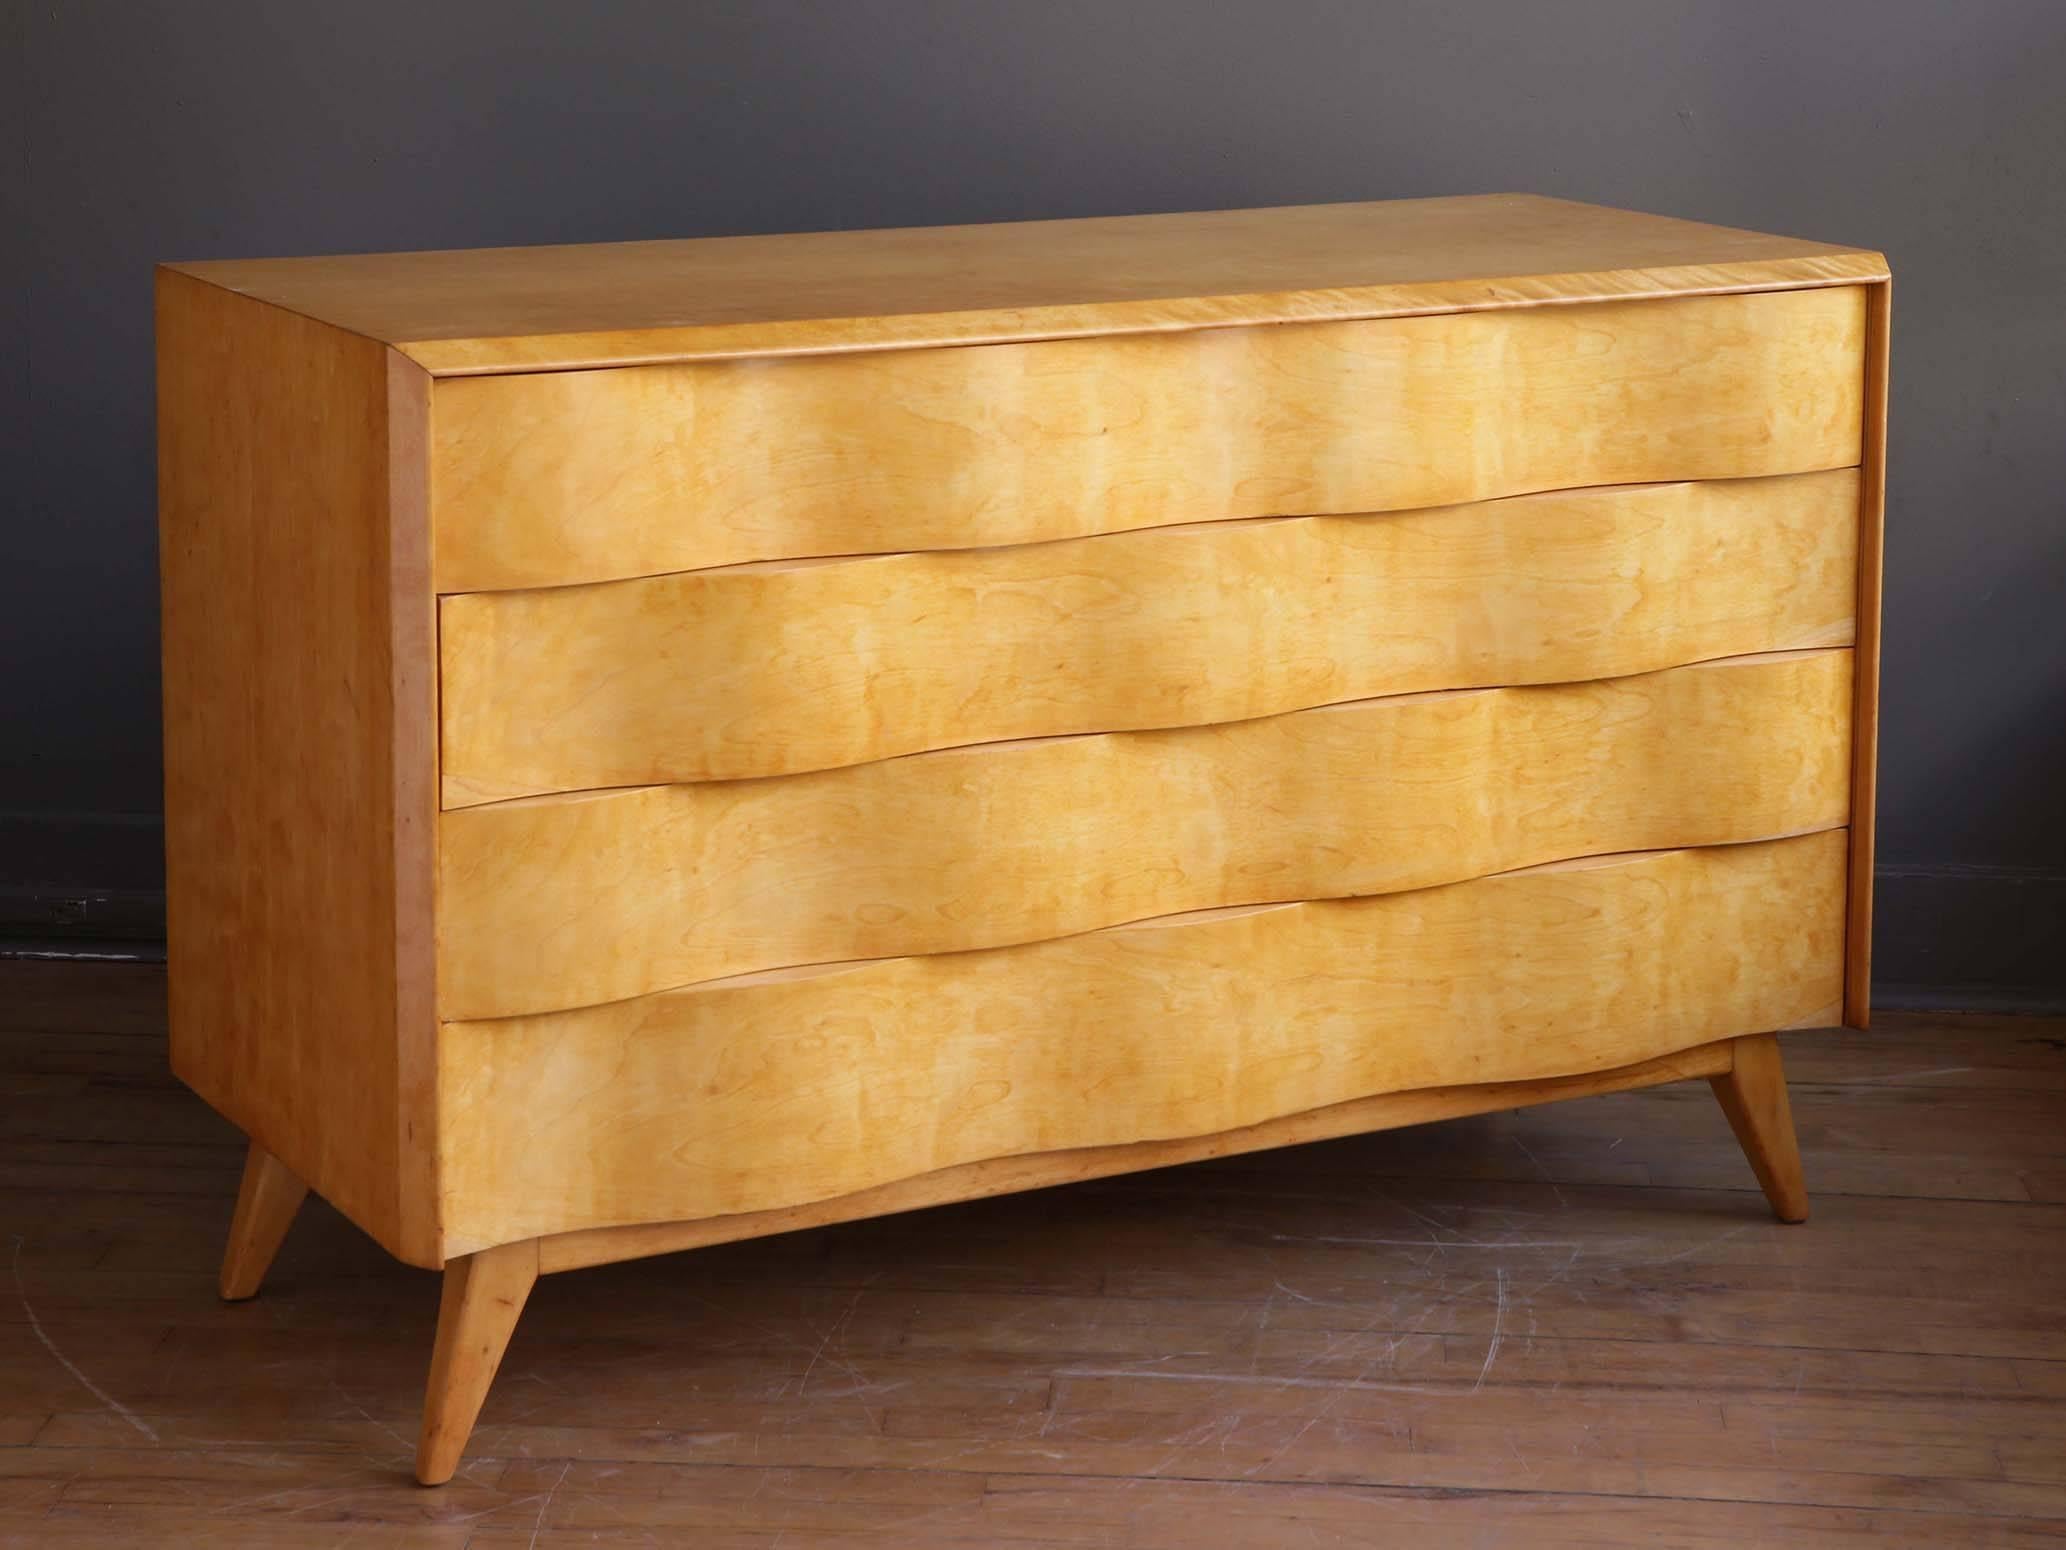 A sculptural birch chest by American designer Edmond Spence, circa 1950s. Featuring four spacious drawers with undulating wave fronts supported by flared feet. Manufactured in Sweden.